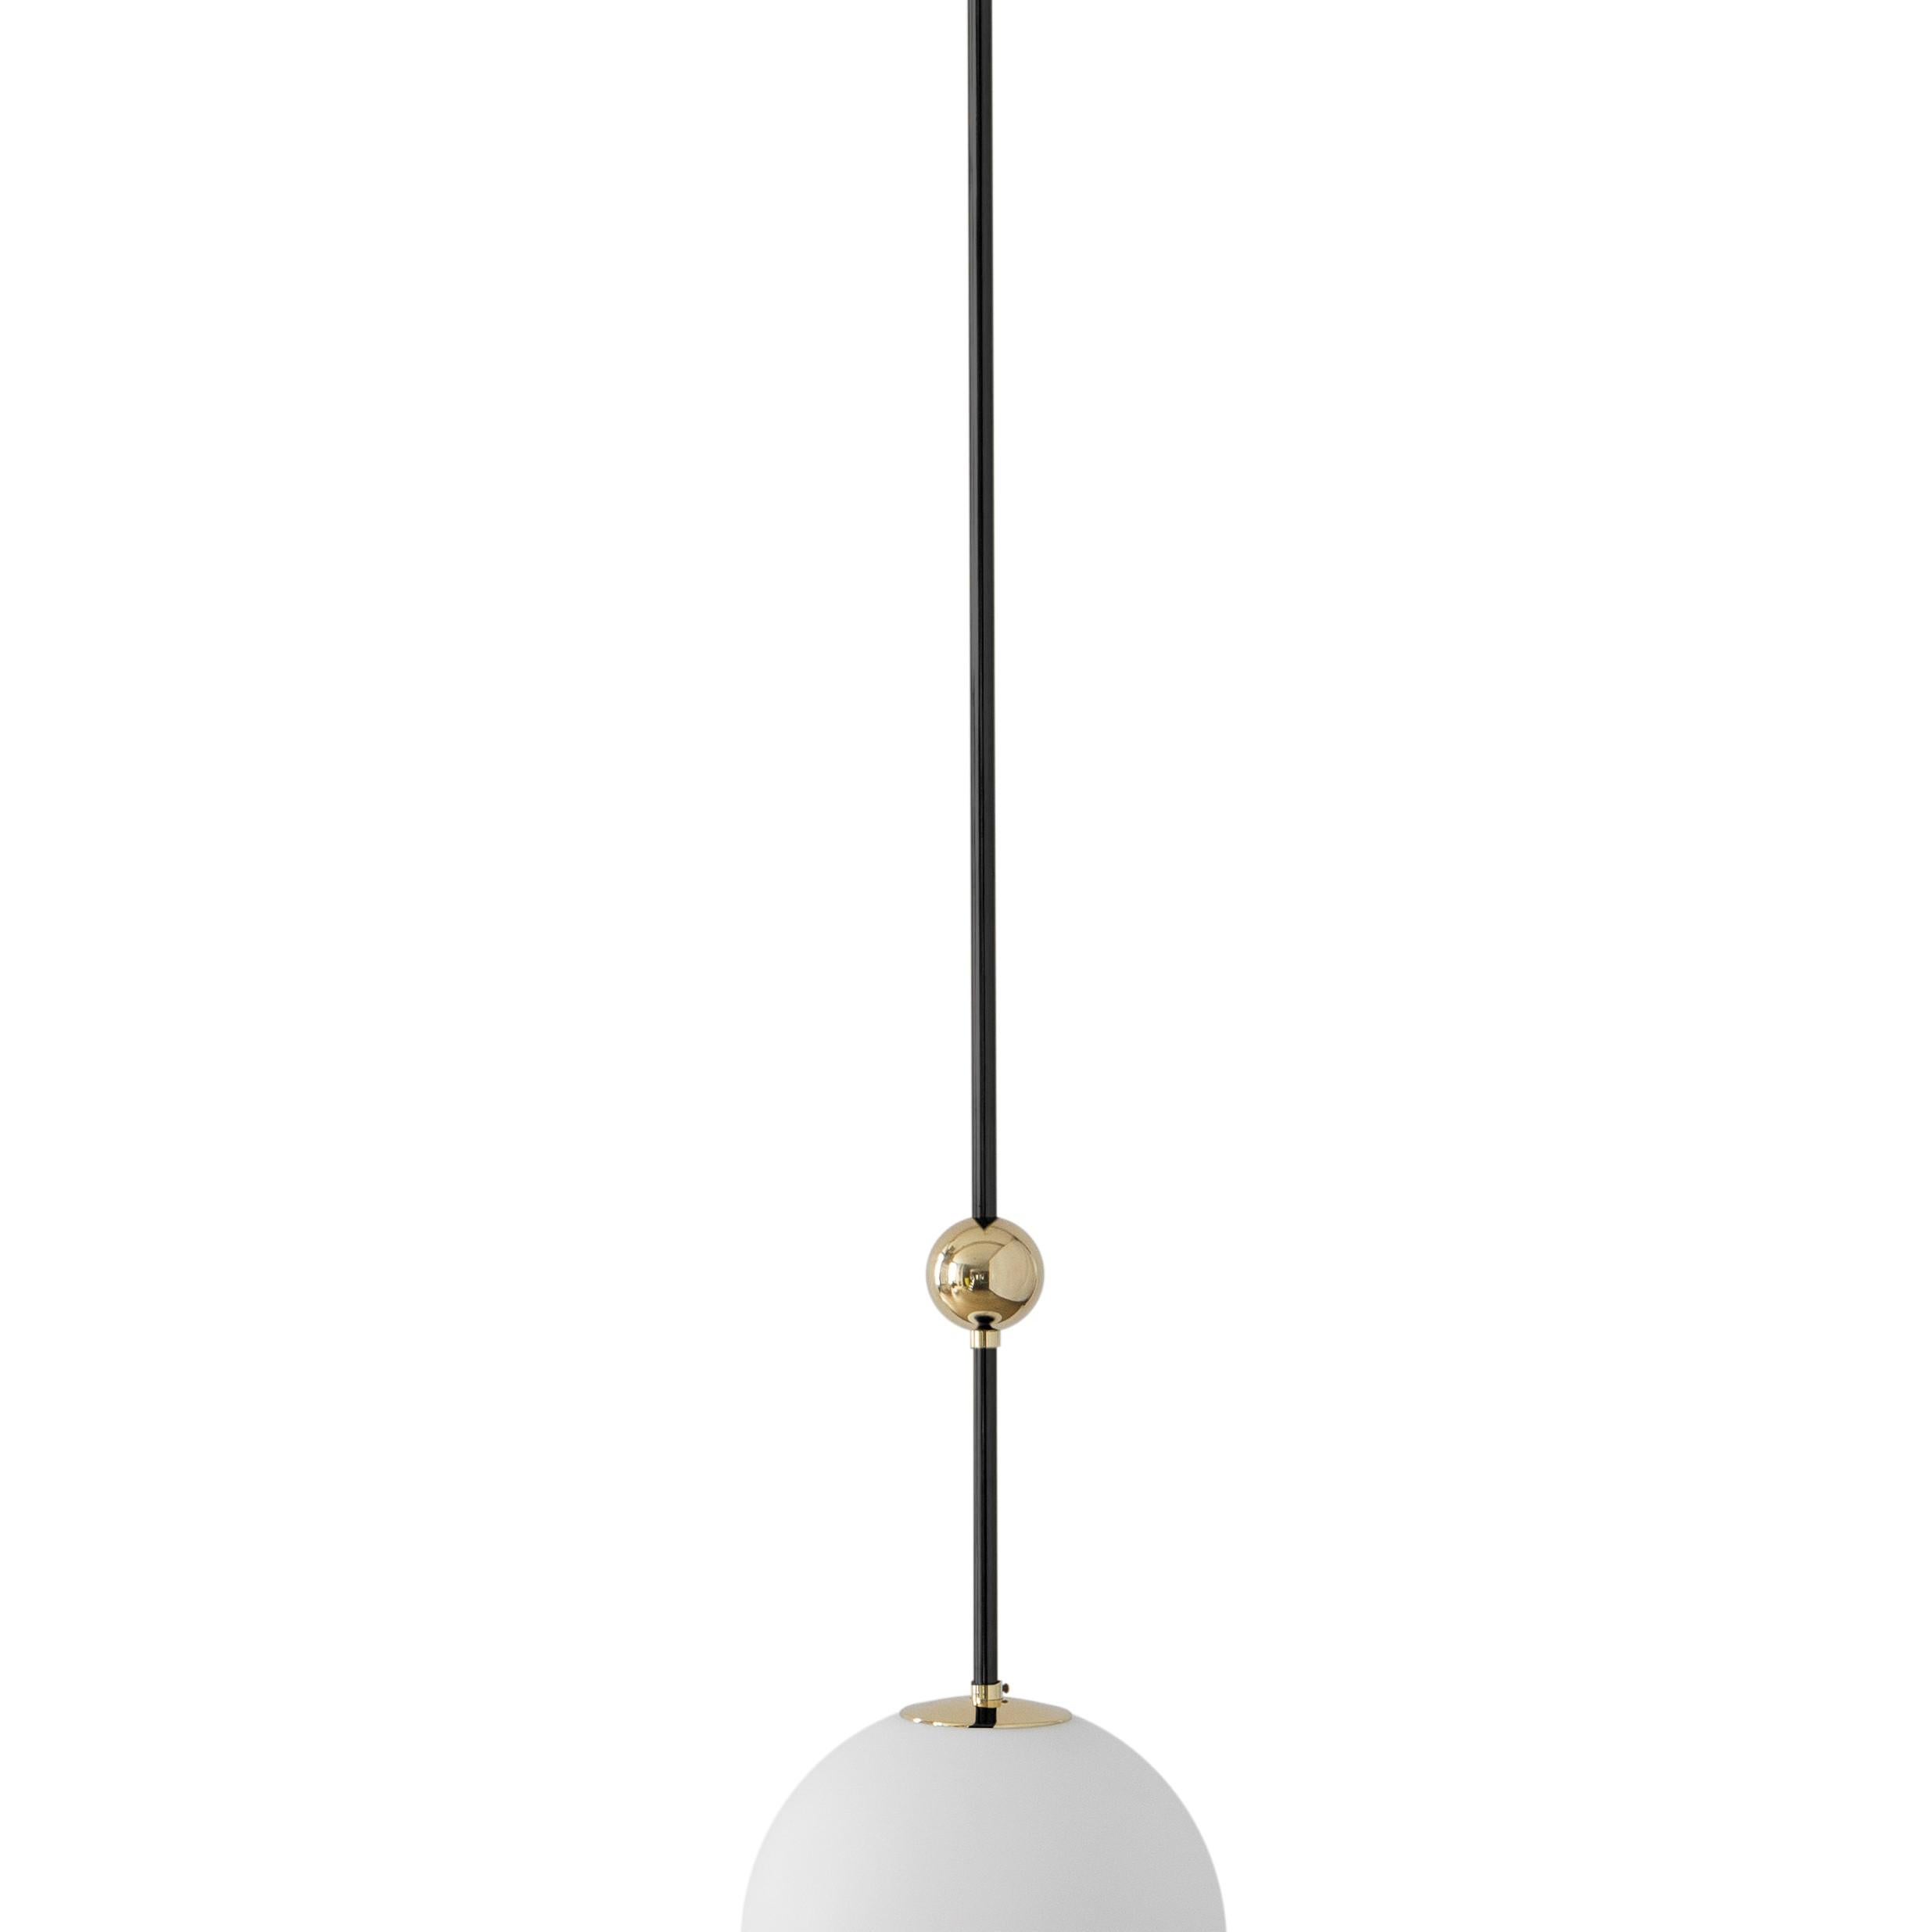 Pendant 02 black by Magic Circus Editions
Dimensions: D 25 x W 25 x H 110 cm, also available in H 130, 150, 175, 190 cm
Materials: Brass, mouth blown glass

All our lamps can be wired according to each country. If sold to the USA it will be